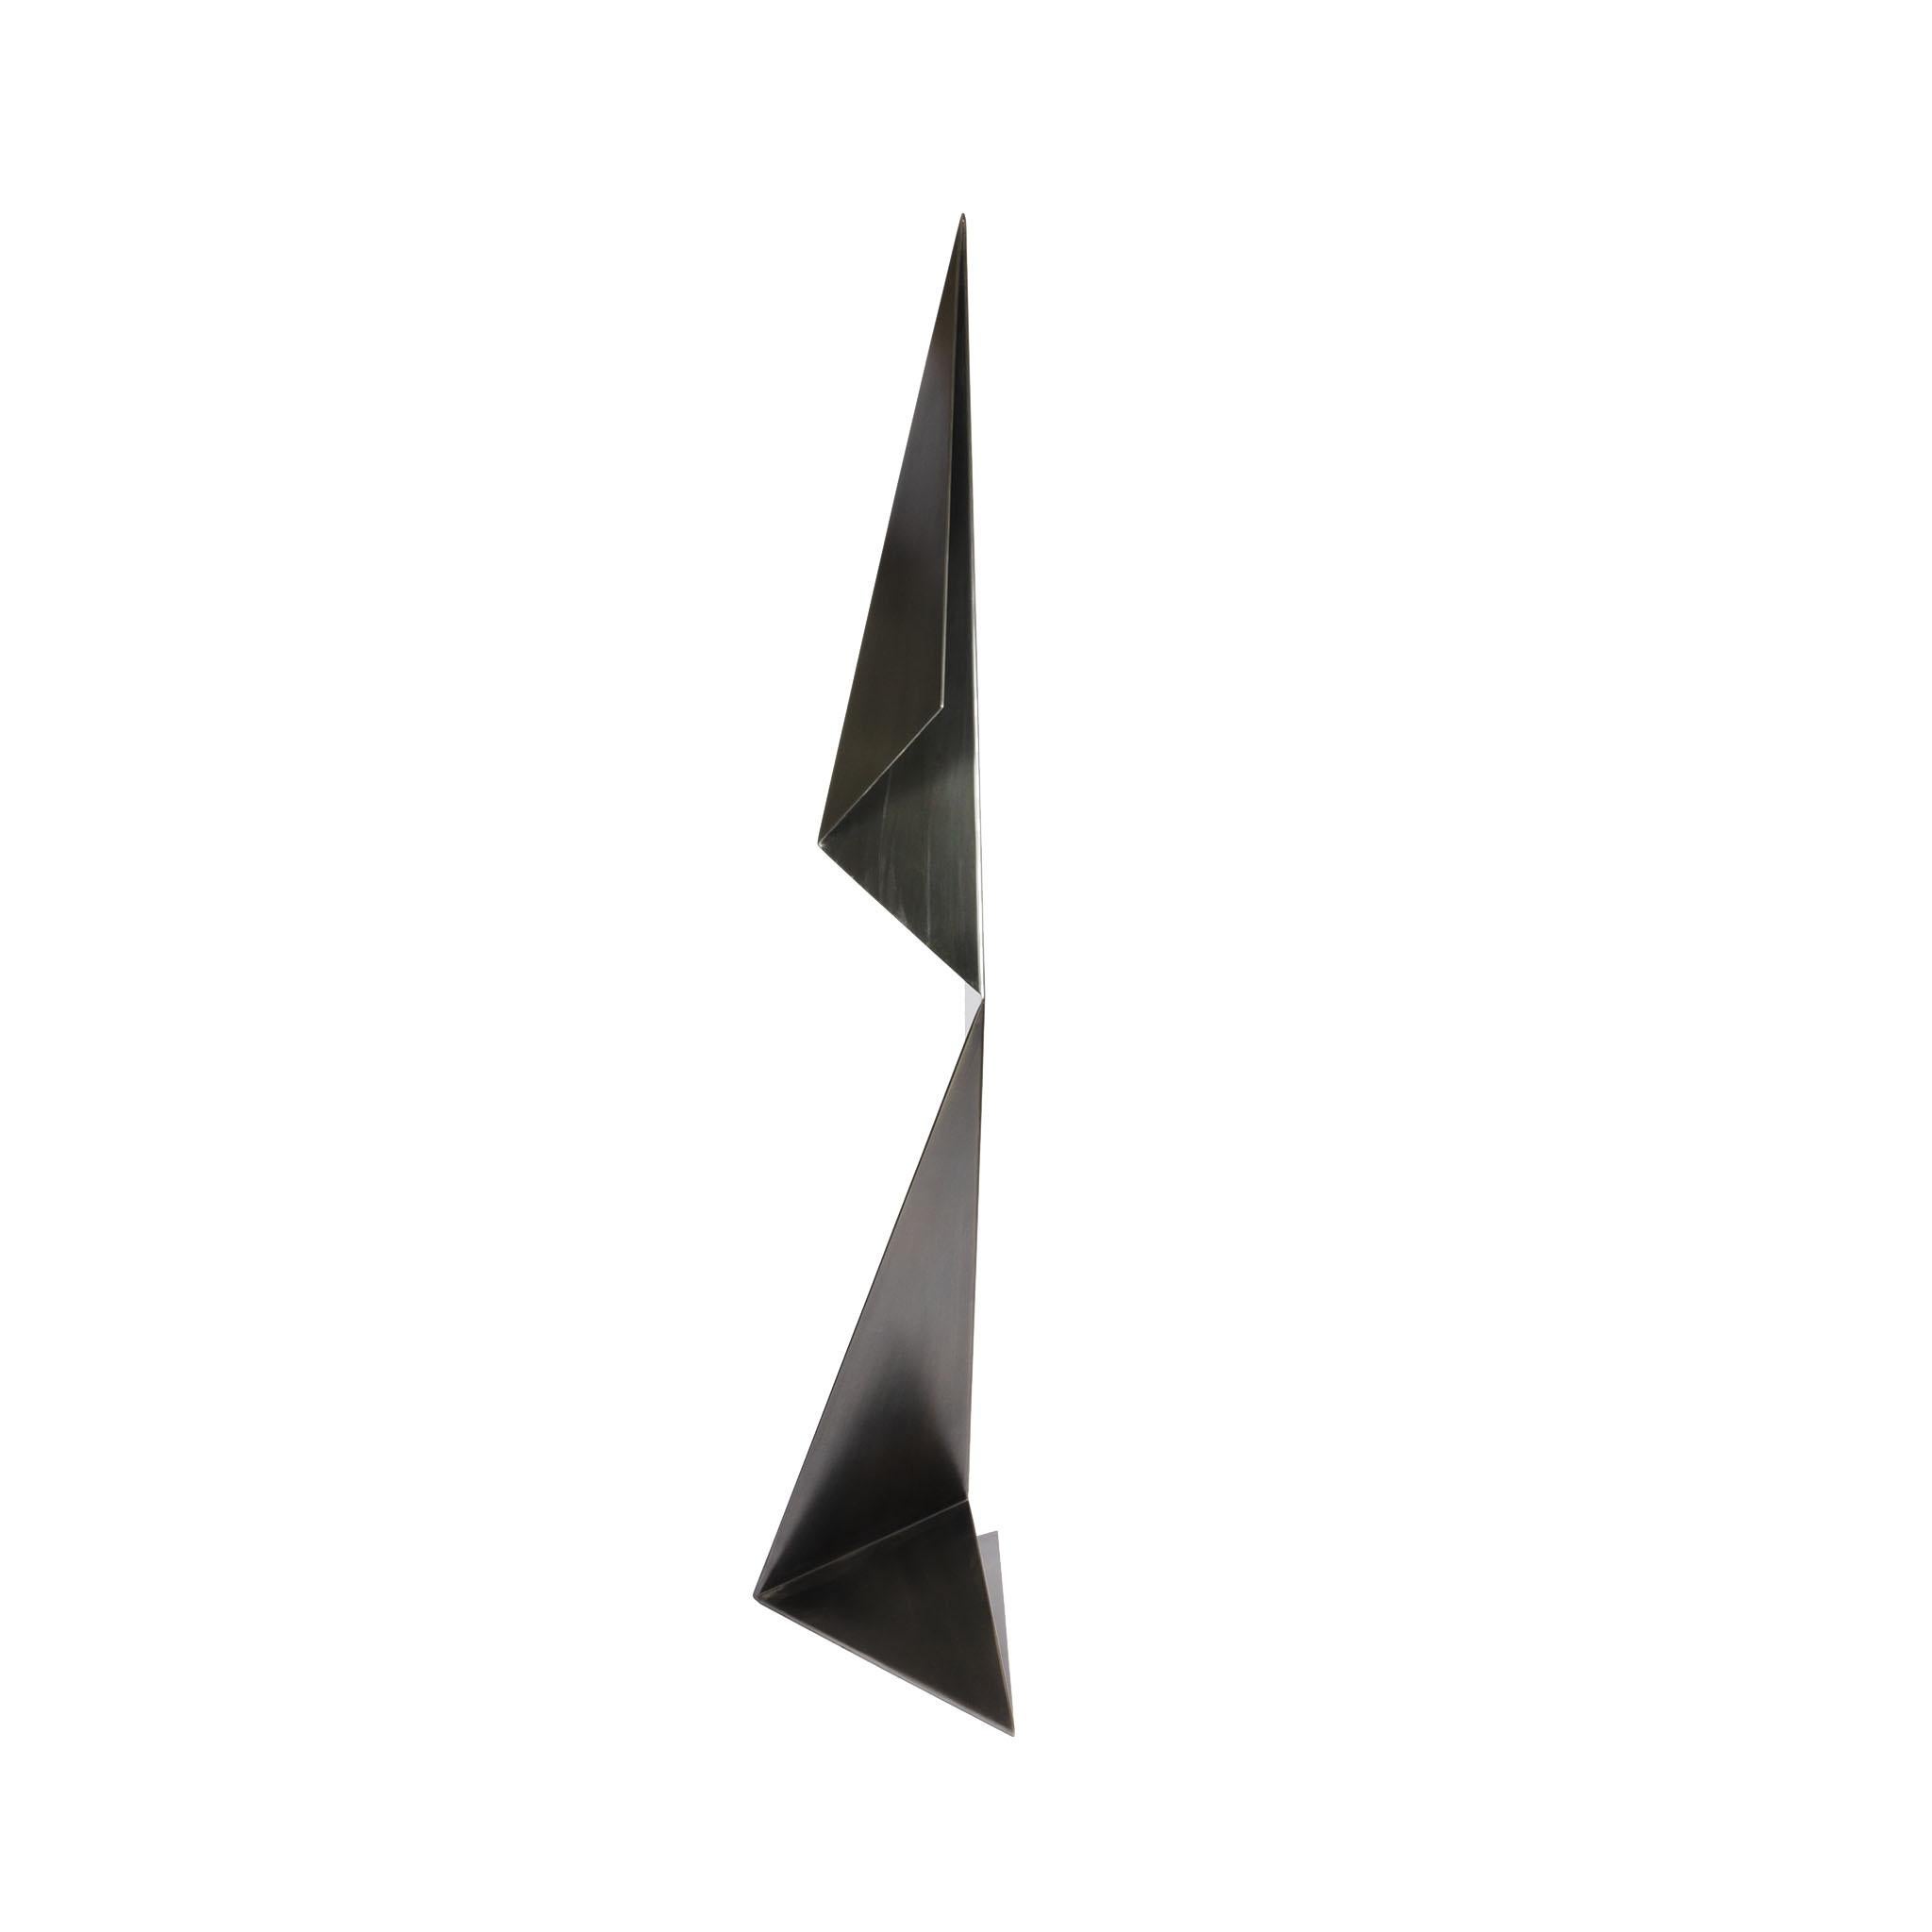 American Abstract Origami Metal Sculpture Figure Hand Blackened Finish For Sale